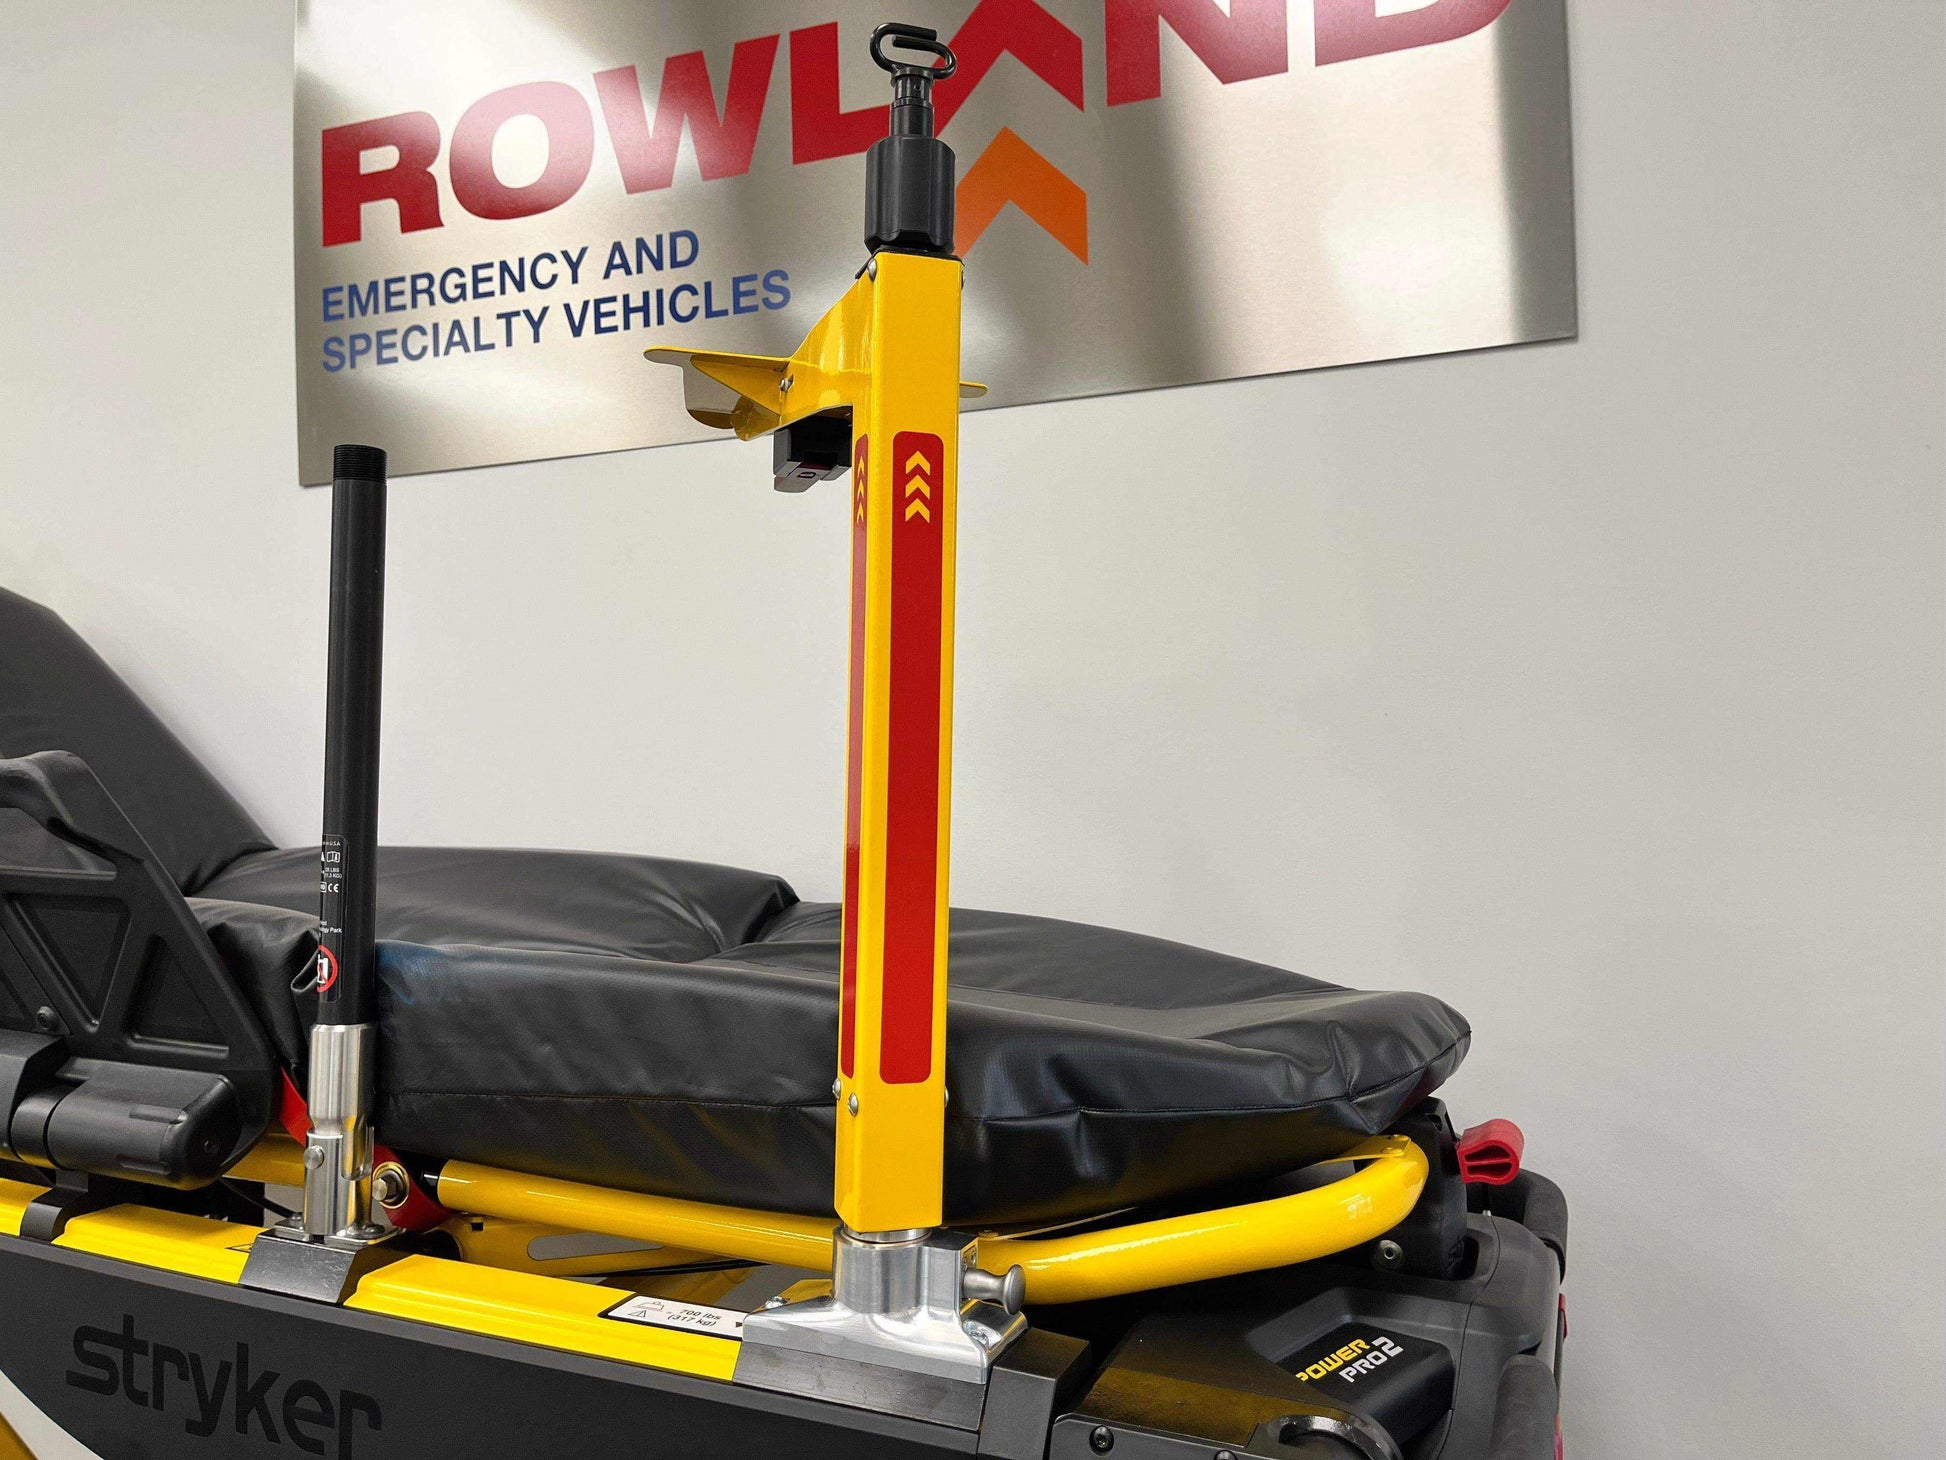 Defibrillator Mounting Block for Stryker® Power-PRO 2 (Patient Left) by Rowland Emergency